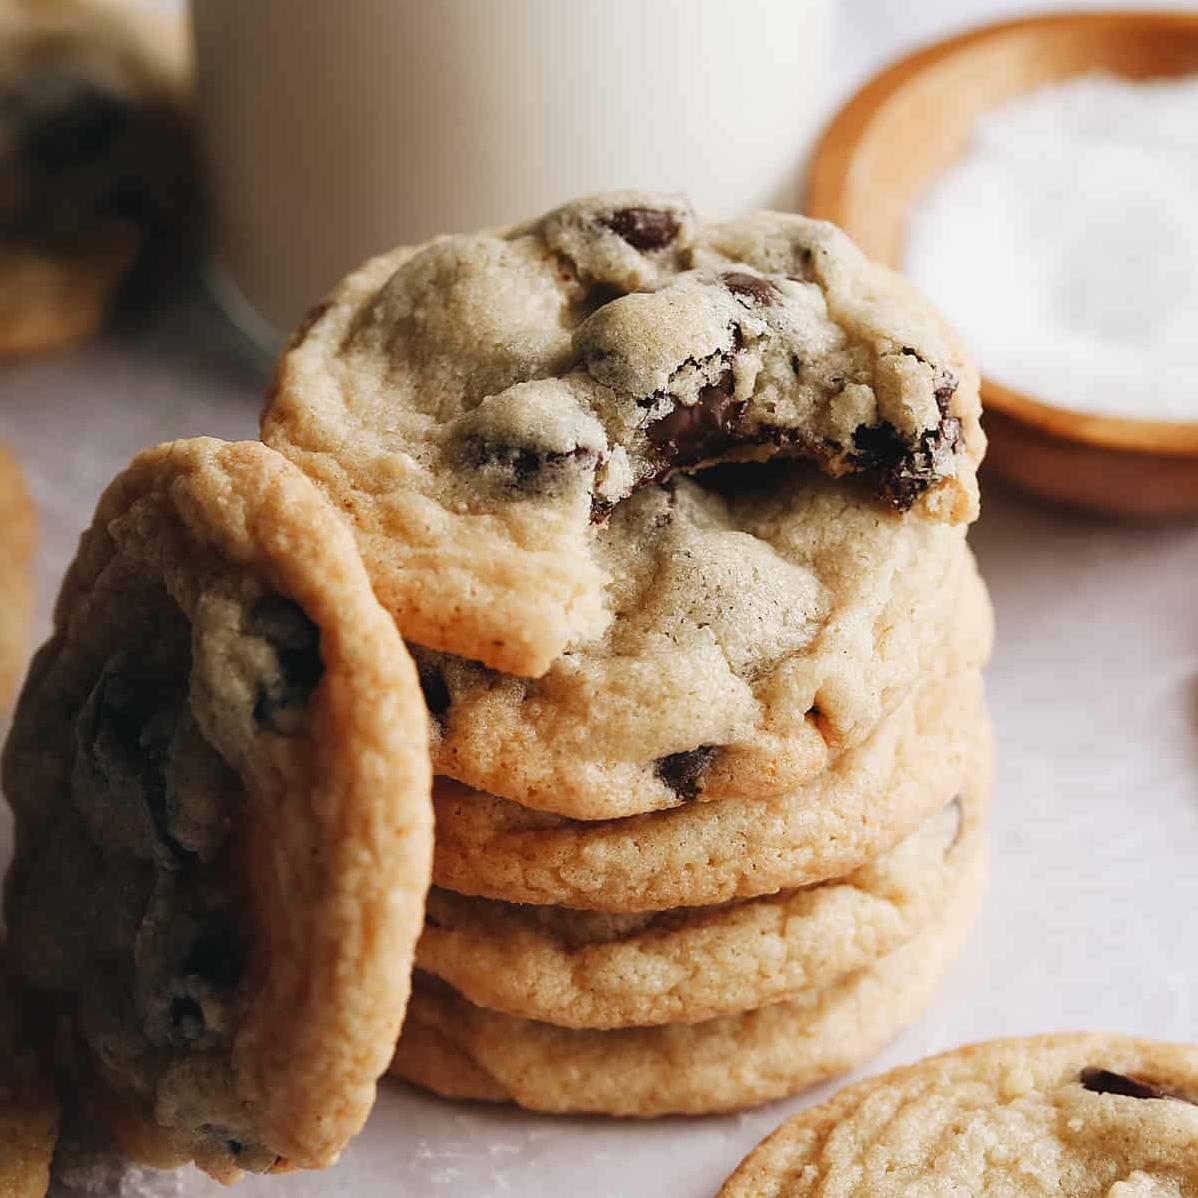 • A perfect stack of golden brown gluten-free chocolate chip cookies fresh out of the oven.